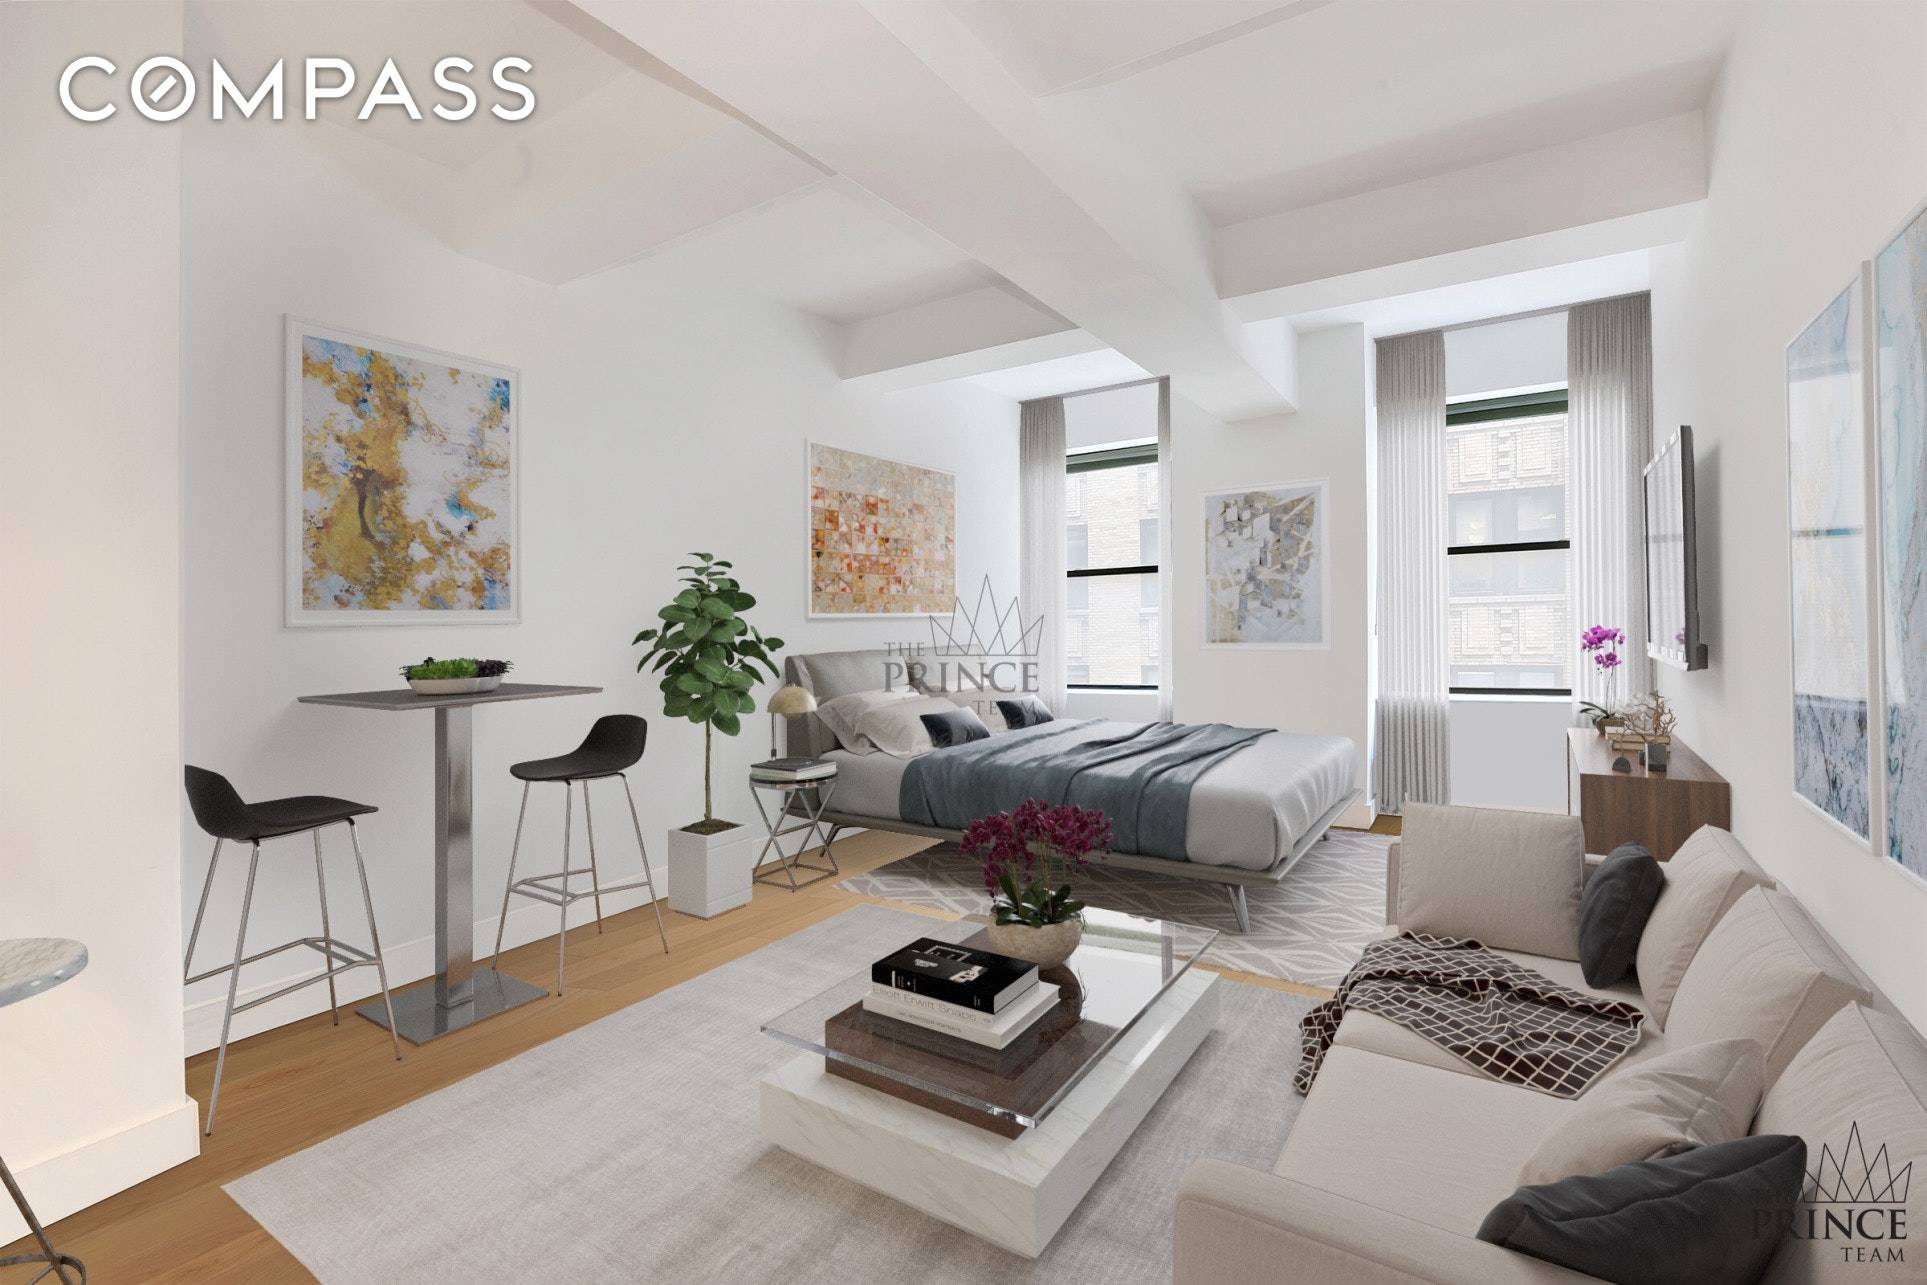 This immaculate studio with bonus room offers the perfect combination of classic proportions and contemporary conveniences in a stellar full service FiDi building.